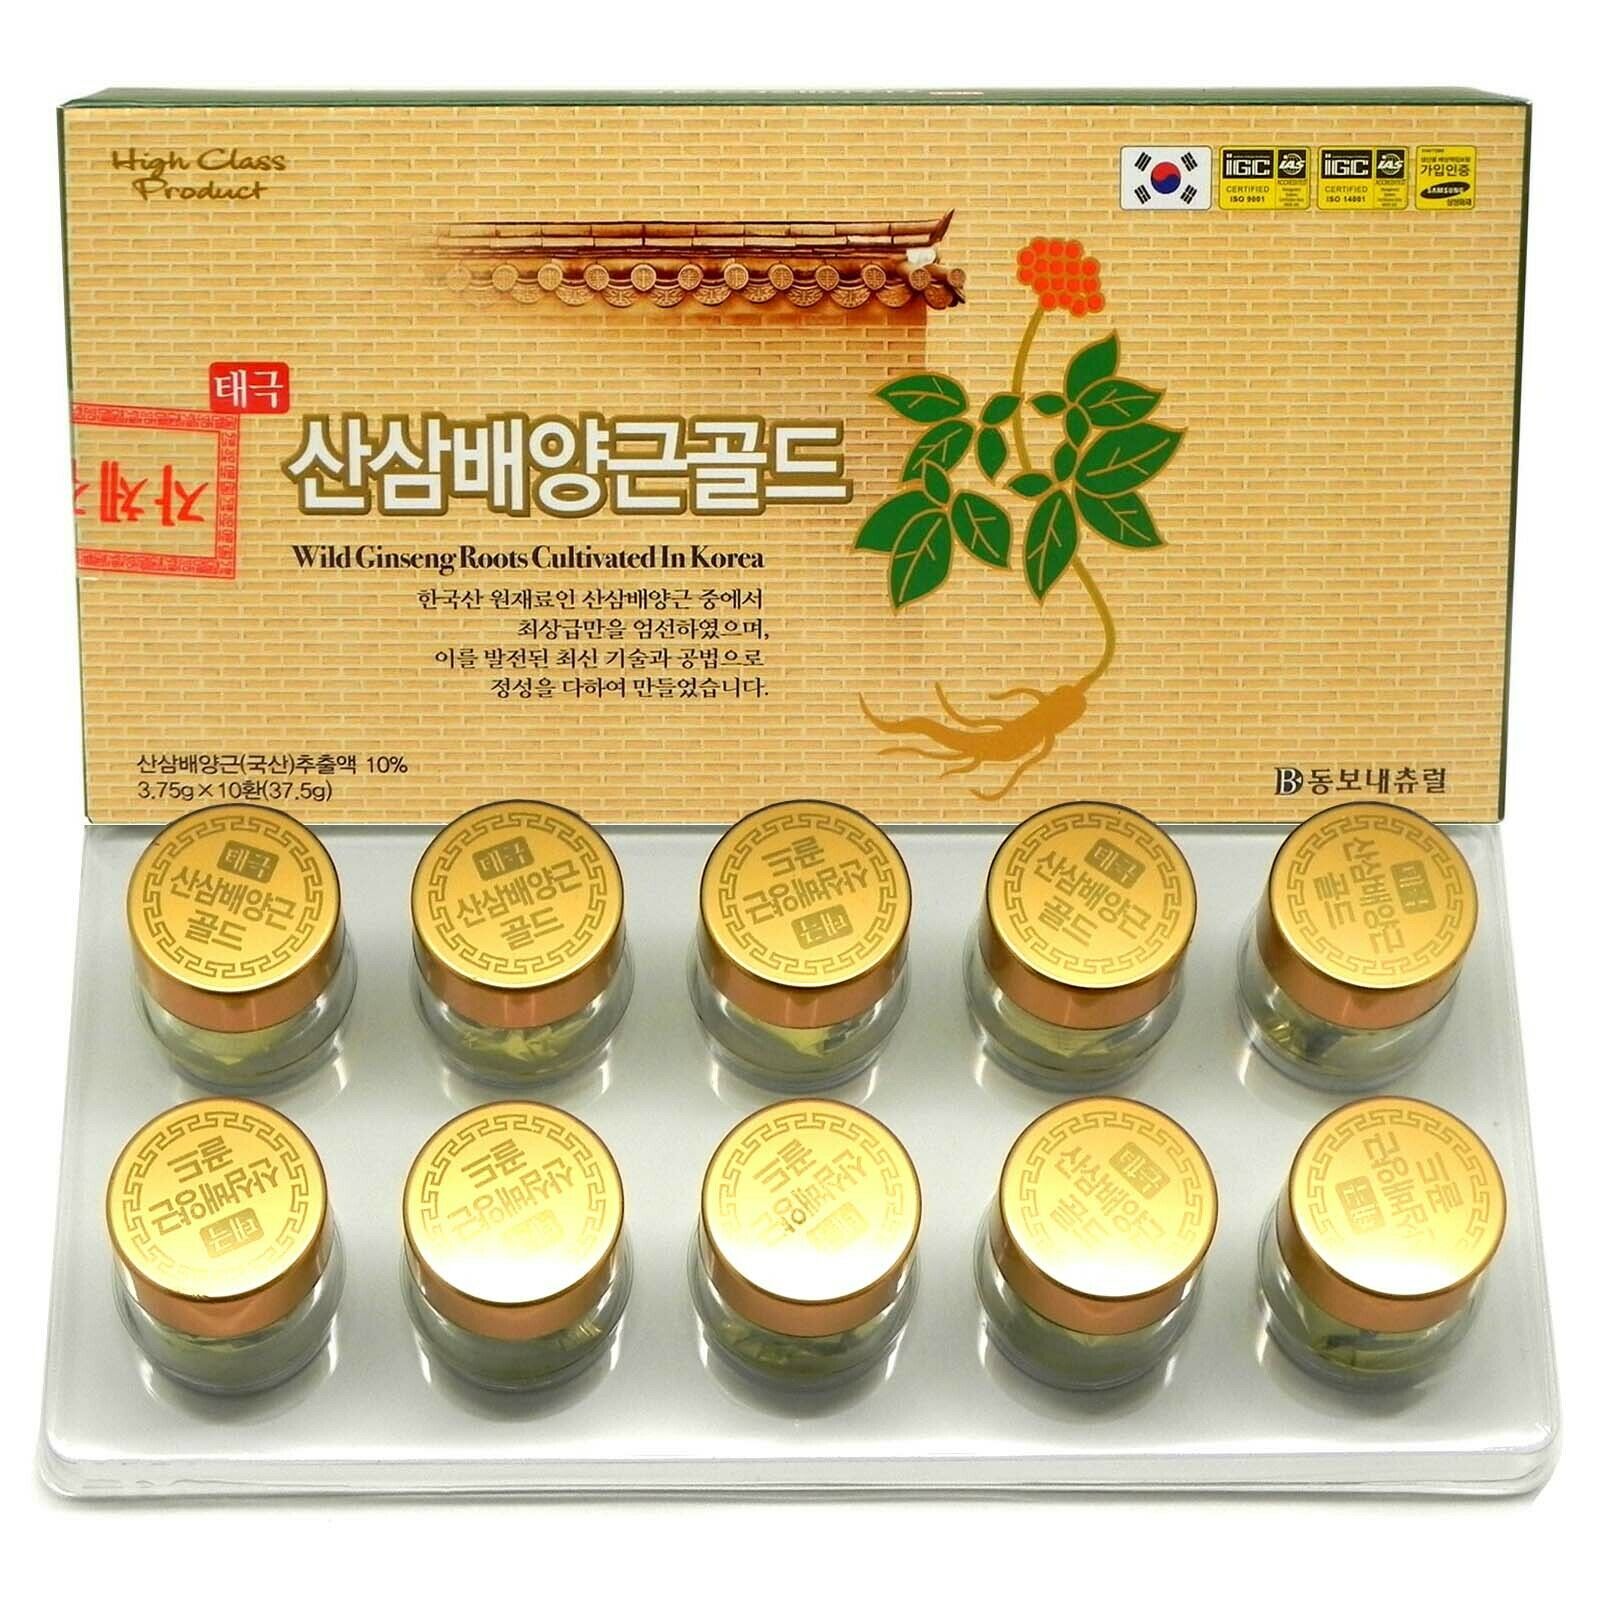 Dongbo Cultivated Roots of Korean Wild Ginseng 3.75g x 10 pills Gifts Herbal Health Supplements Foods